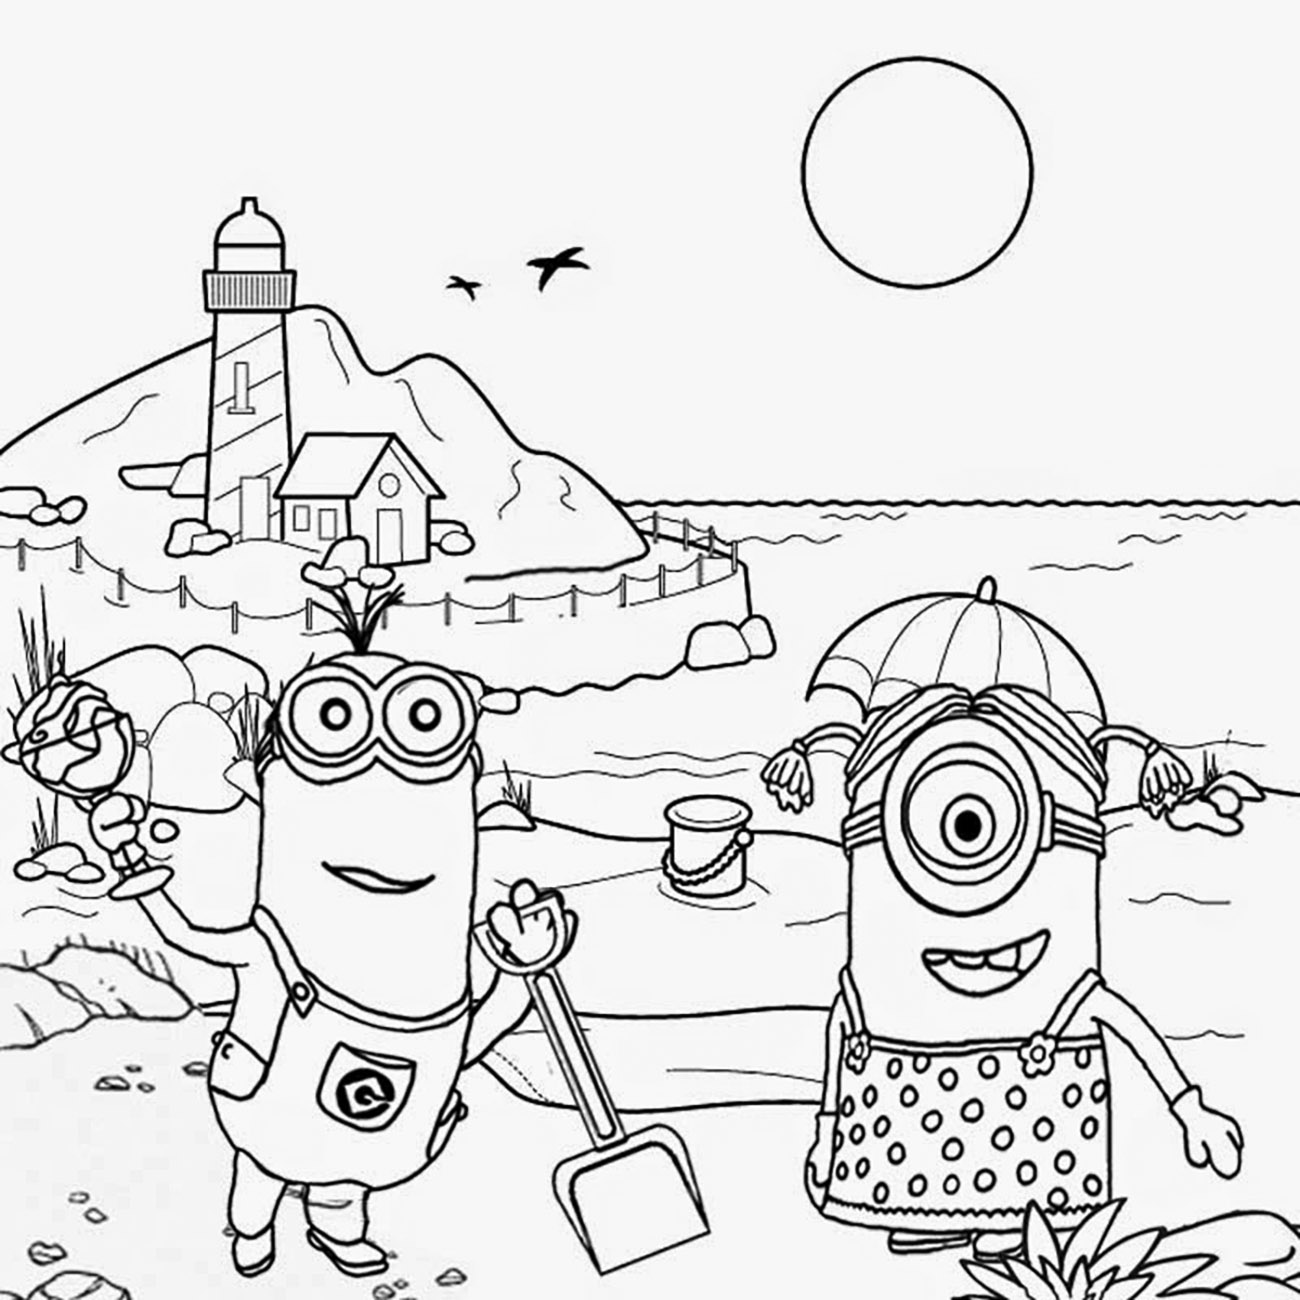 Super simple Minions coloring page